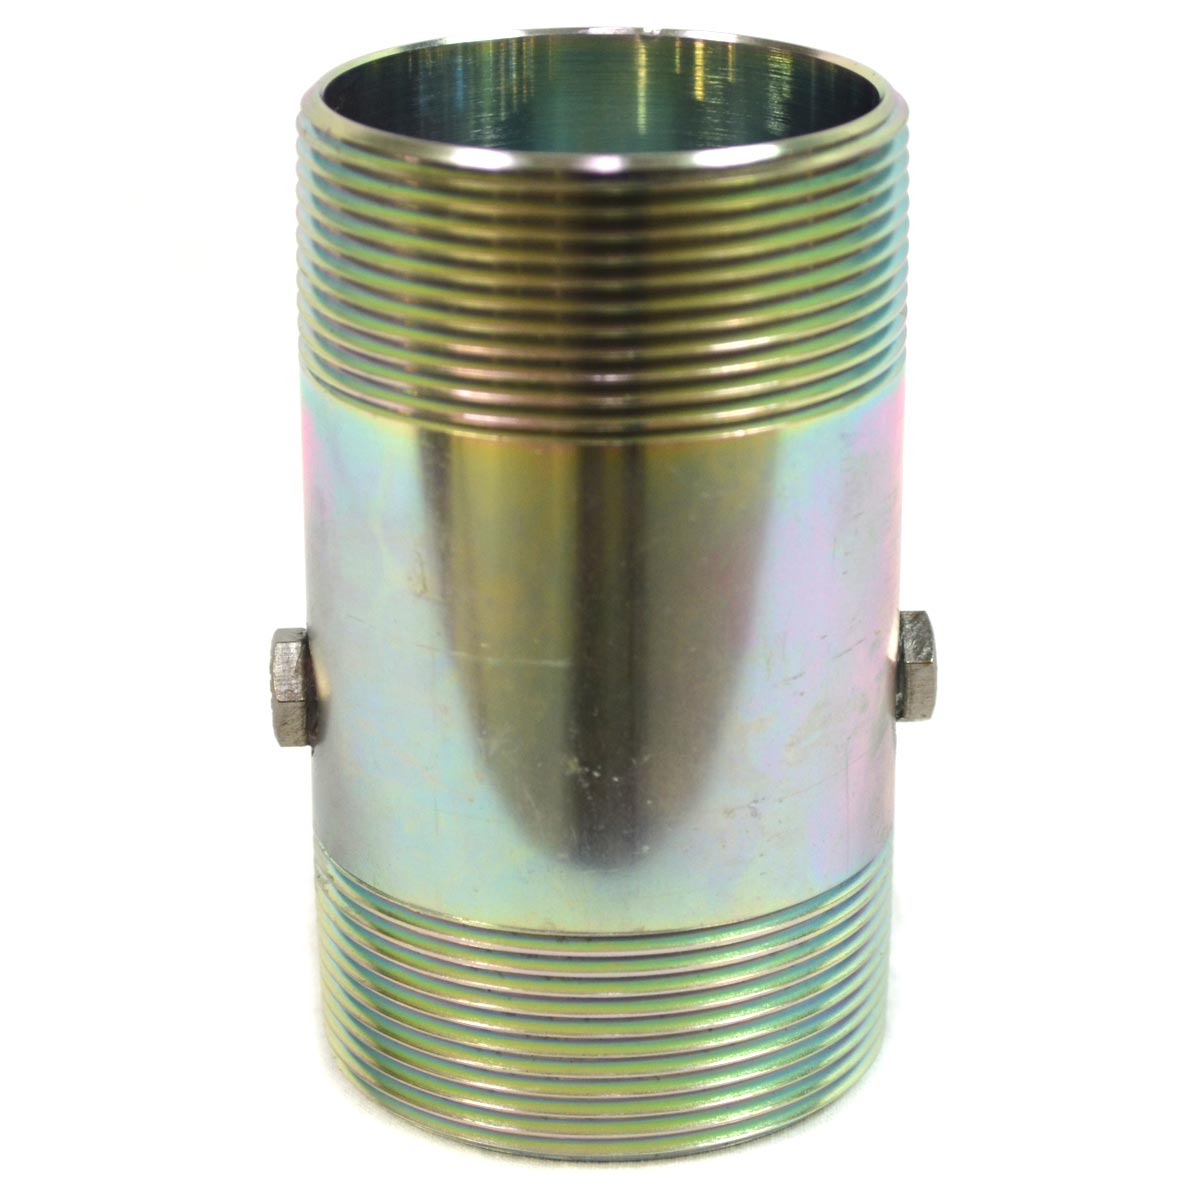 2" Inline Check Valve | pdblowers, Inc.